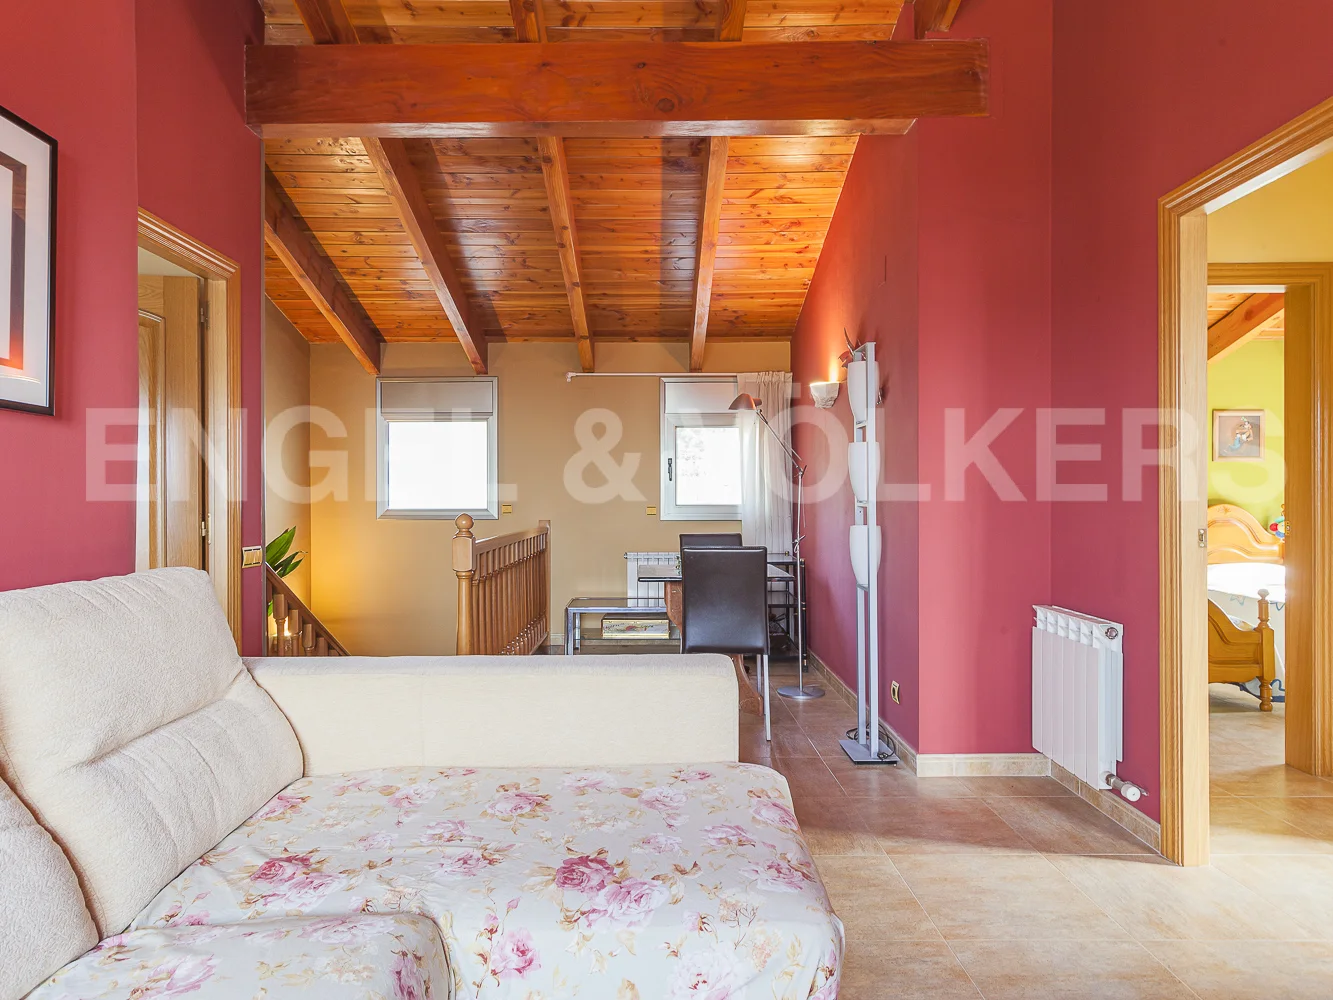 Detached house with open views in L'Ametlla